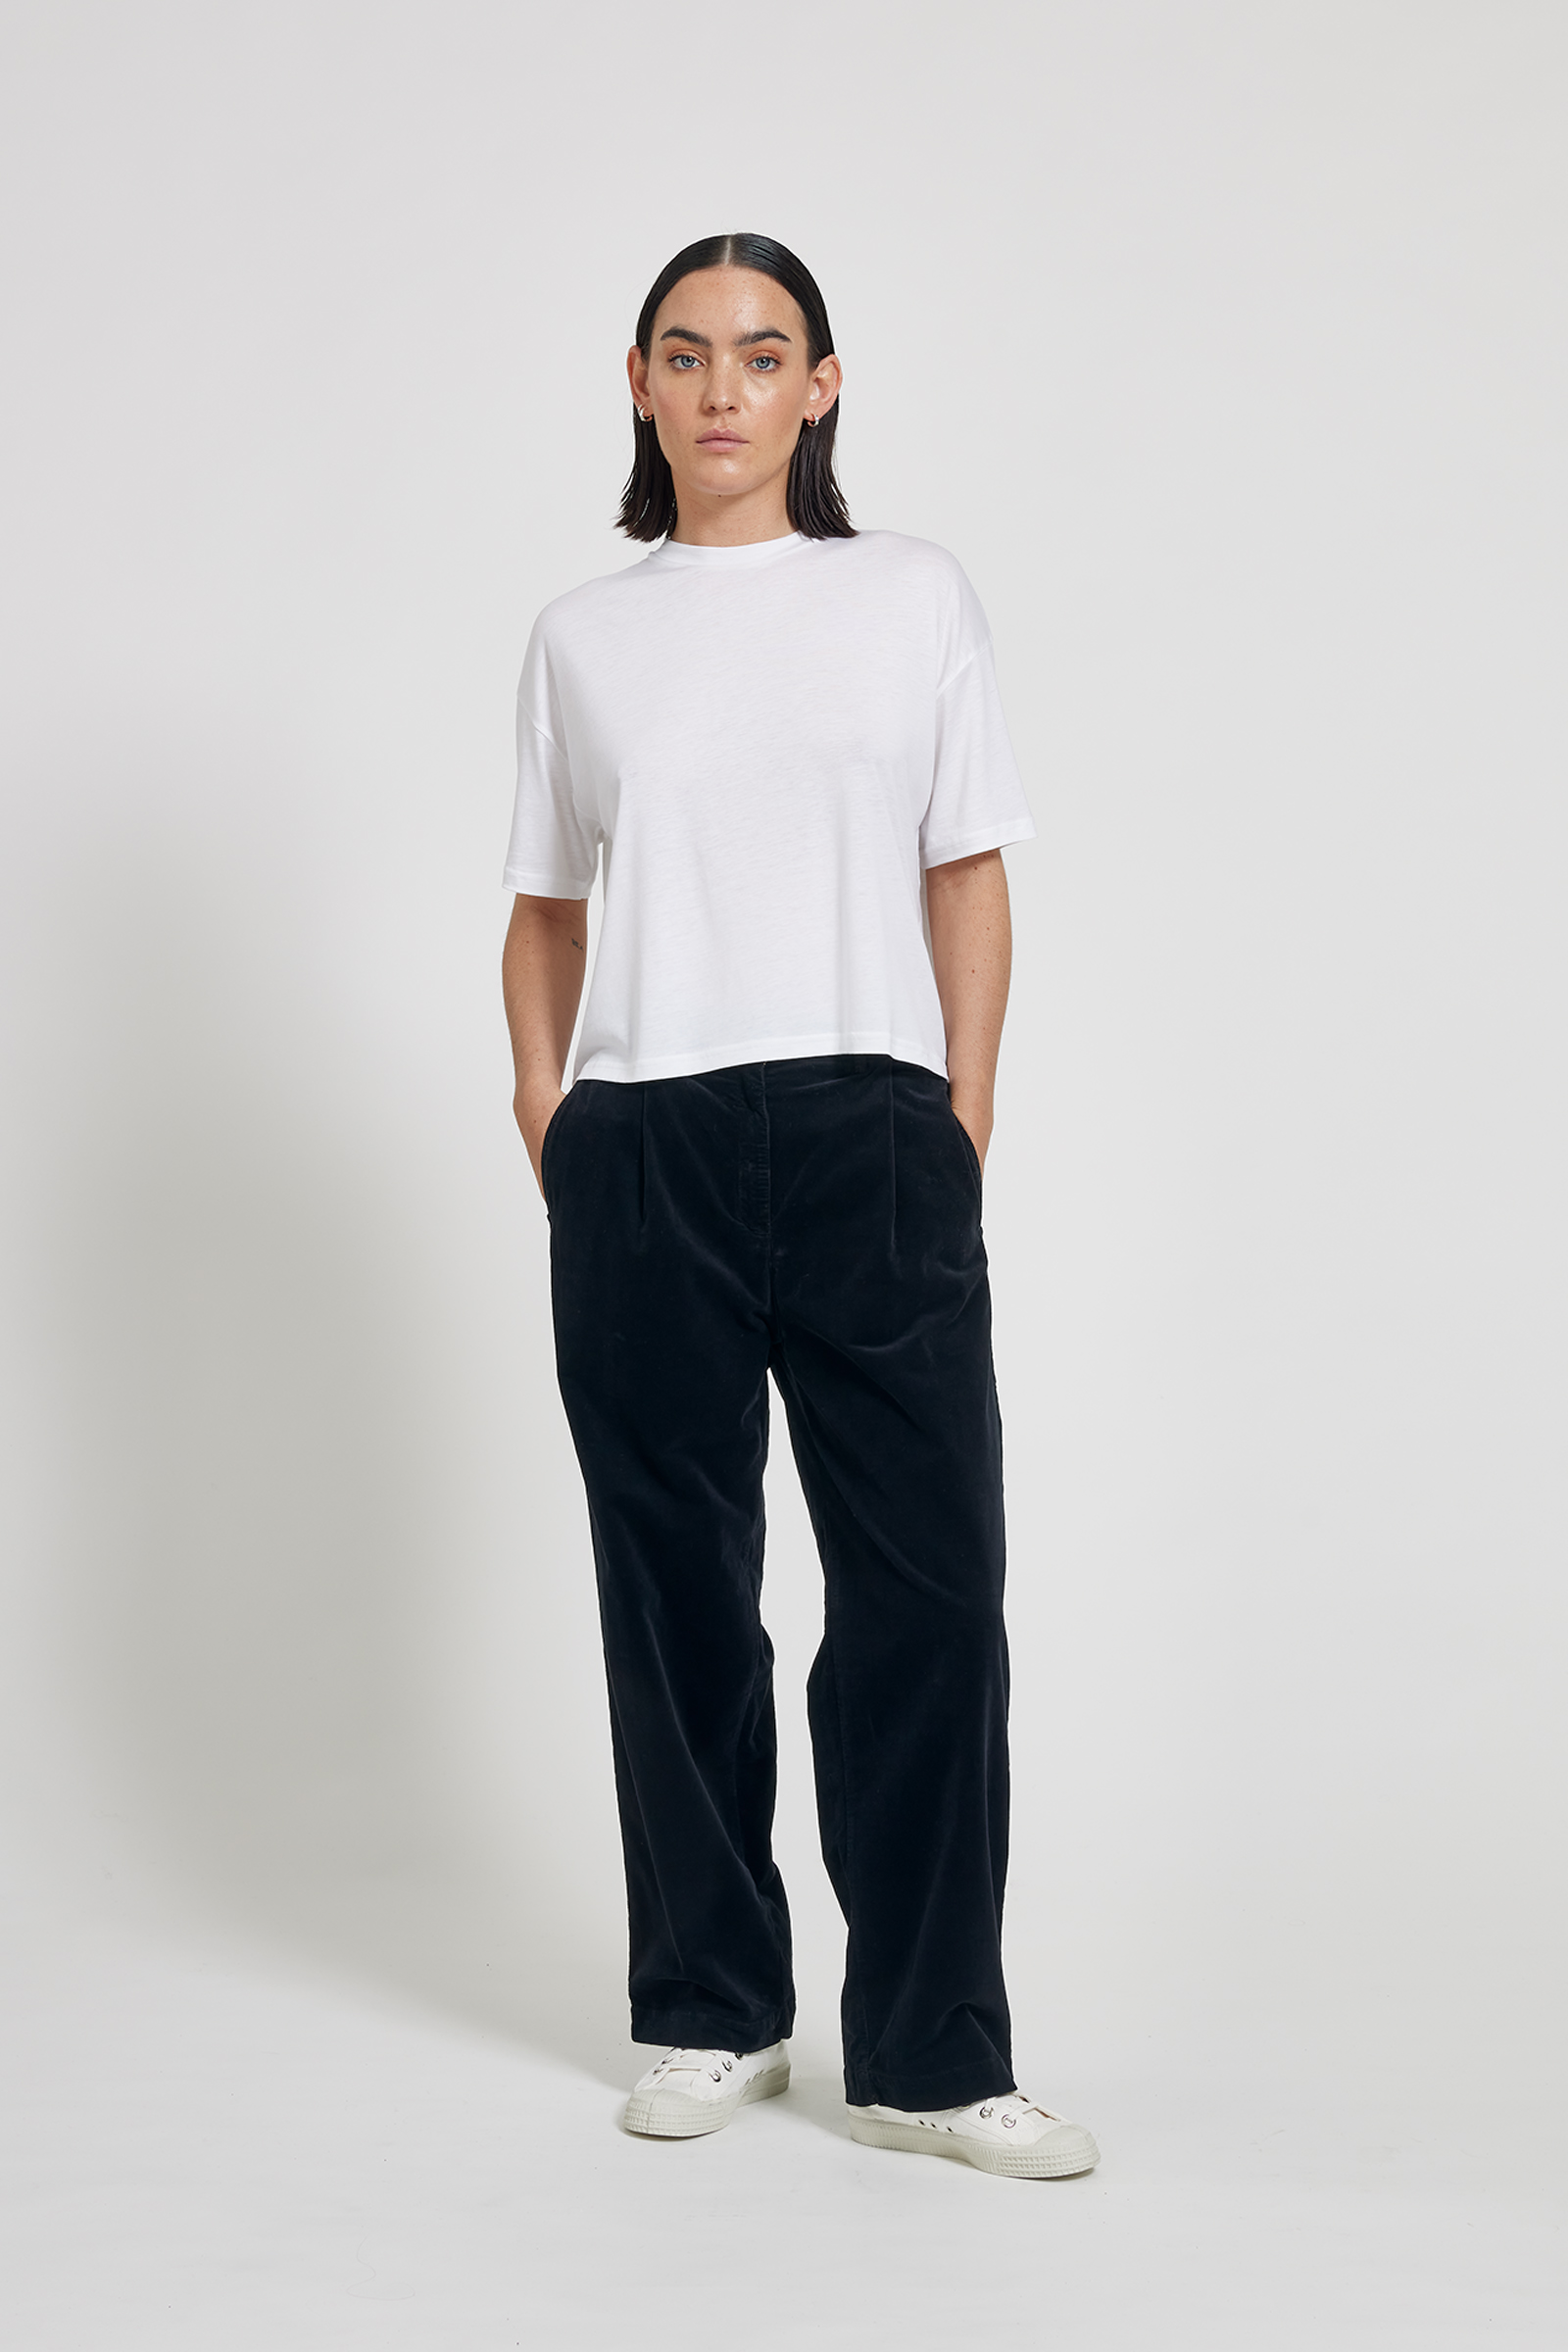 asos drape pocket pants, a love story – A House in the Hills